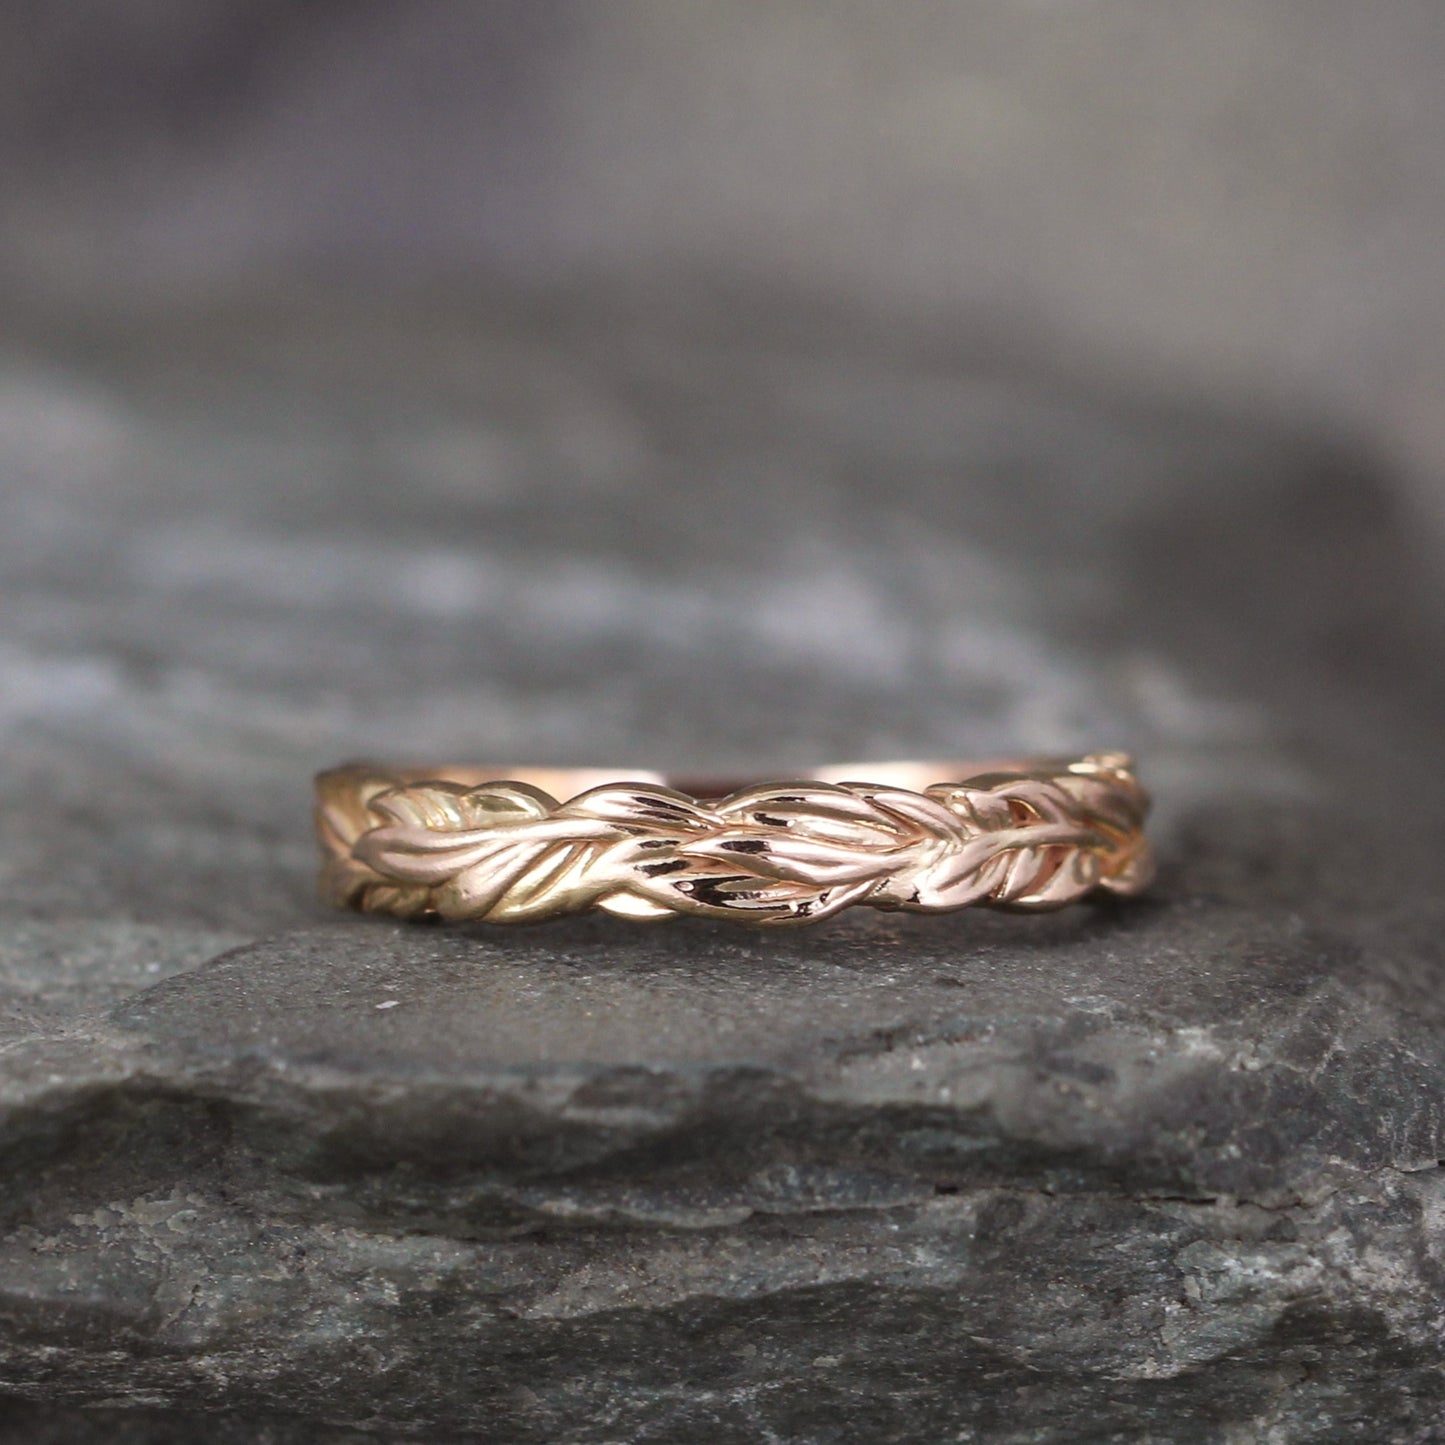 Leaf Design Band - Your choice of Rose, White or Yellow Gold